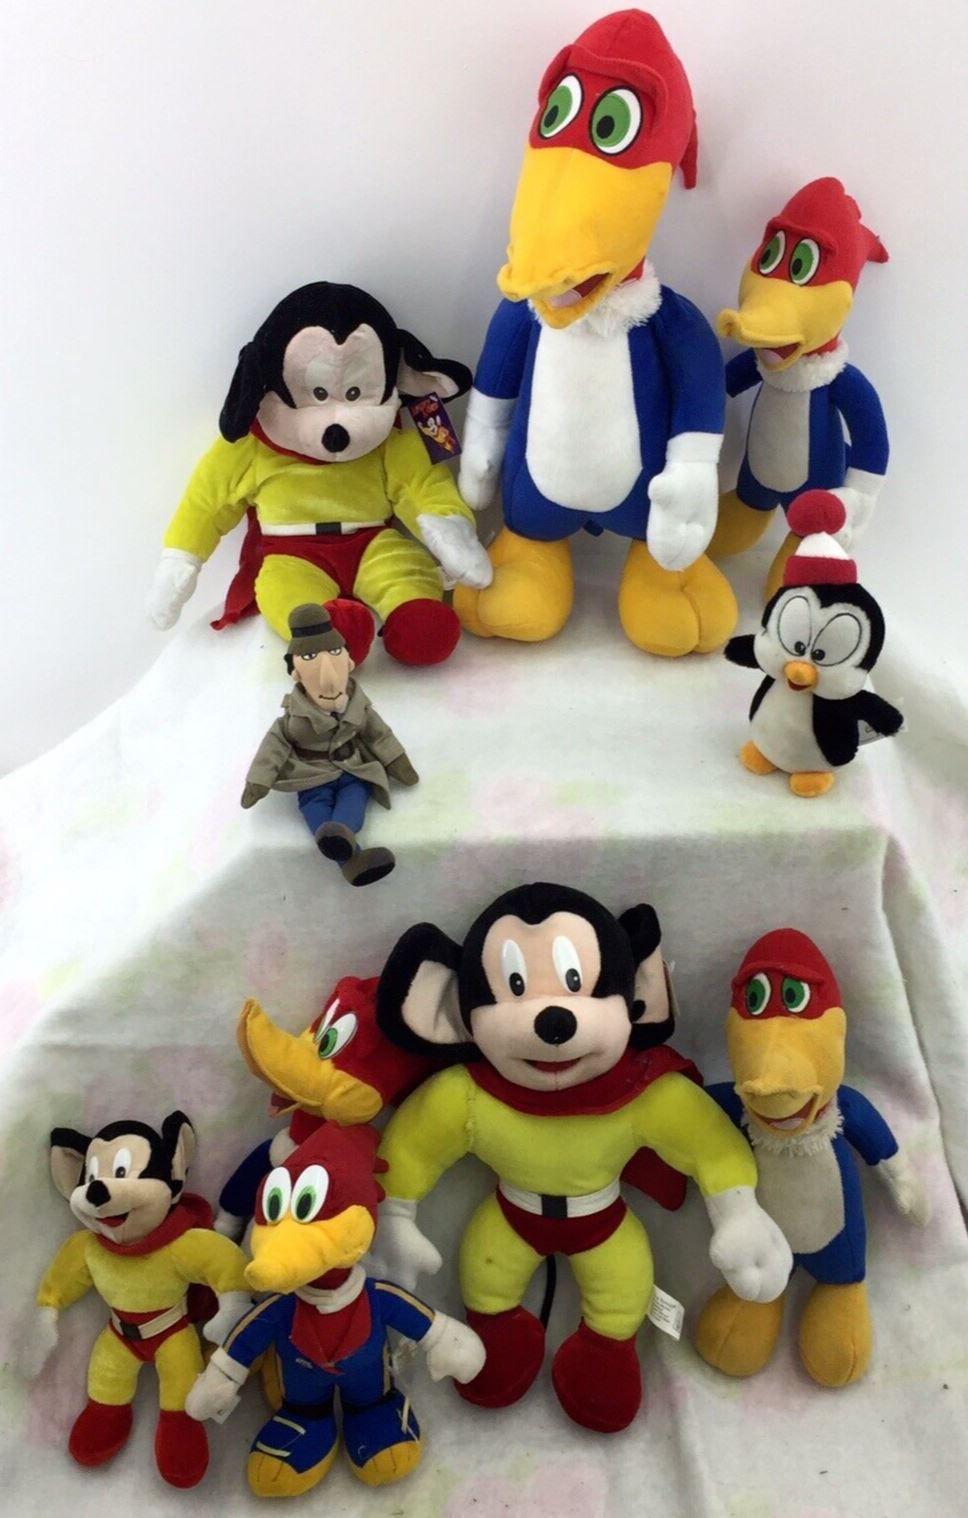 VTG LOT of 10 Woody Woodpecker Mighty Mouse Chilly Willy Old Cartoons Plush Toys